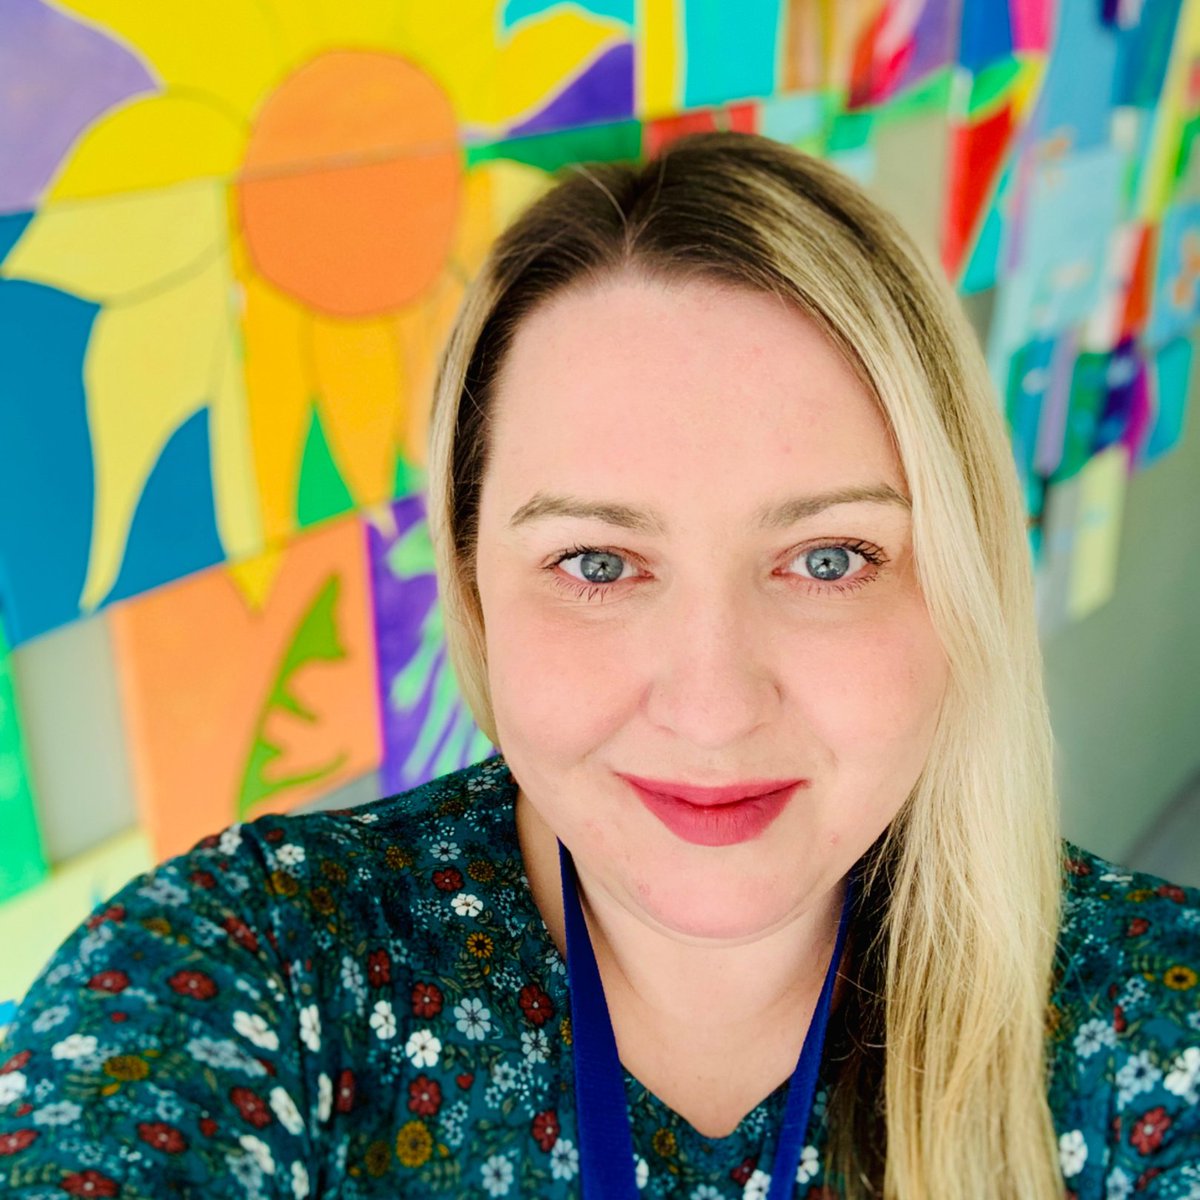 Meet Katie, our dedicated social worker at Naomi Centre, providing safe housing & support for young women. With years of experience across various programs at Stella’s Circle, her passion for frontline, non-judgmental community work shines through in every aspect of her role.